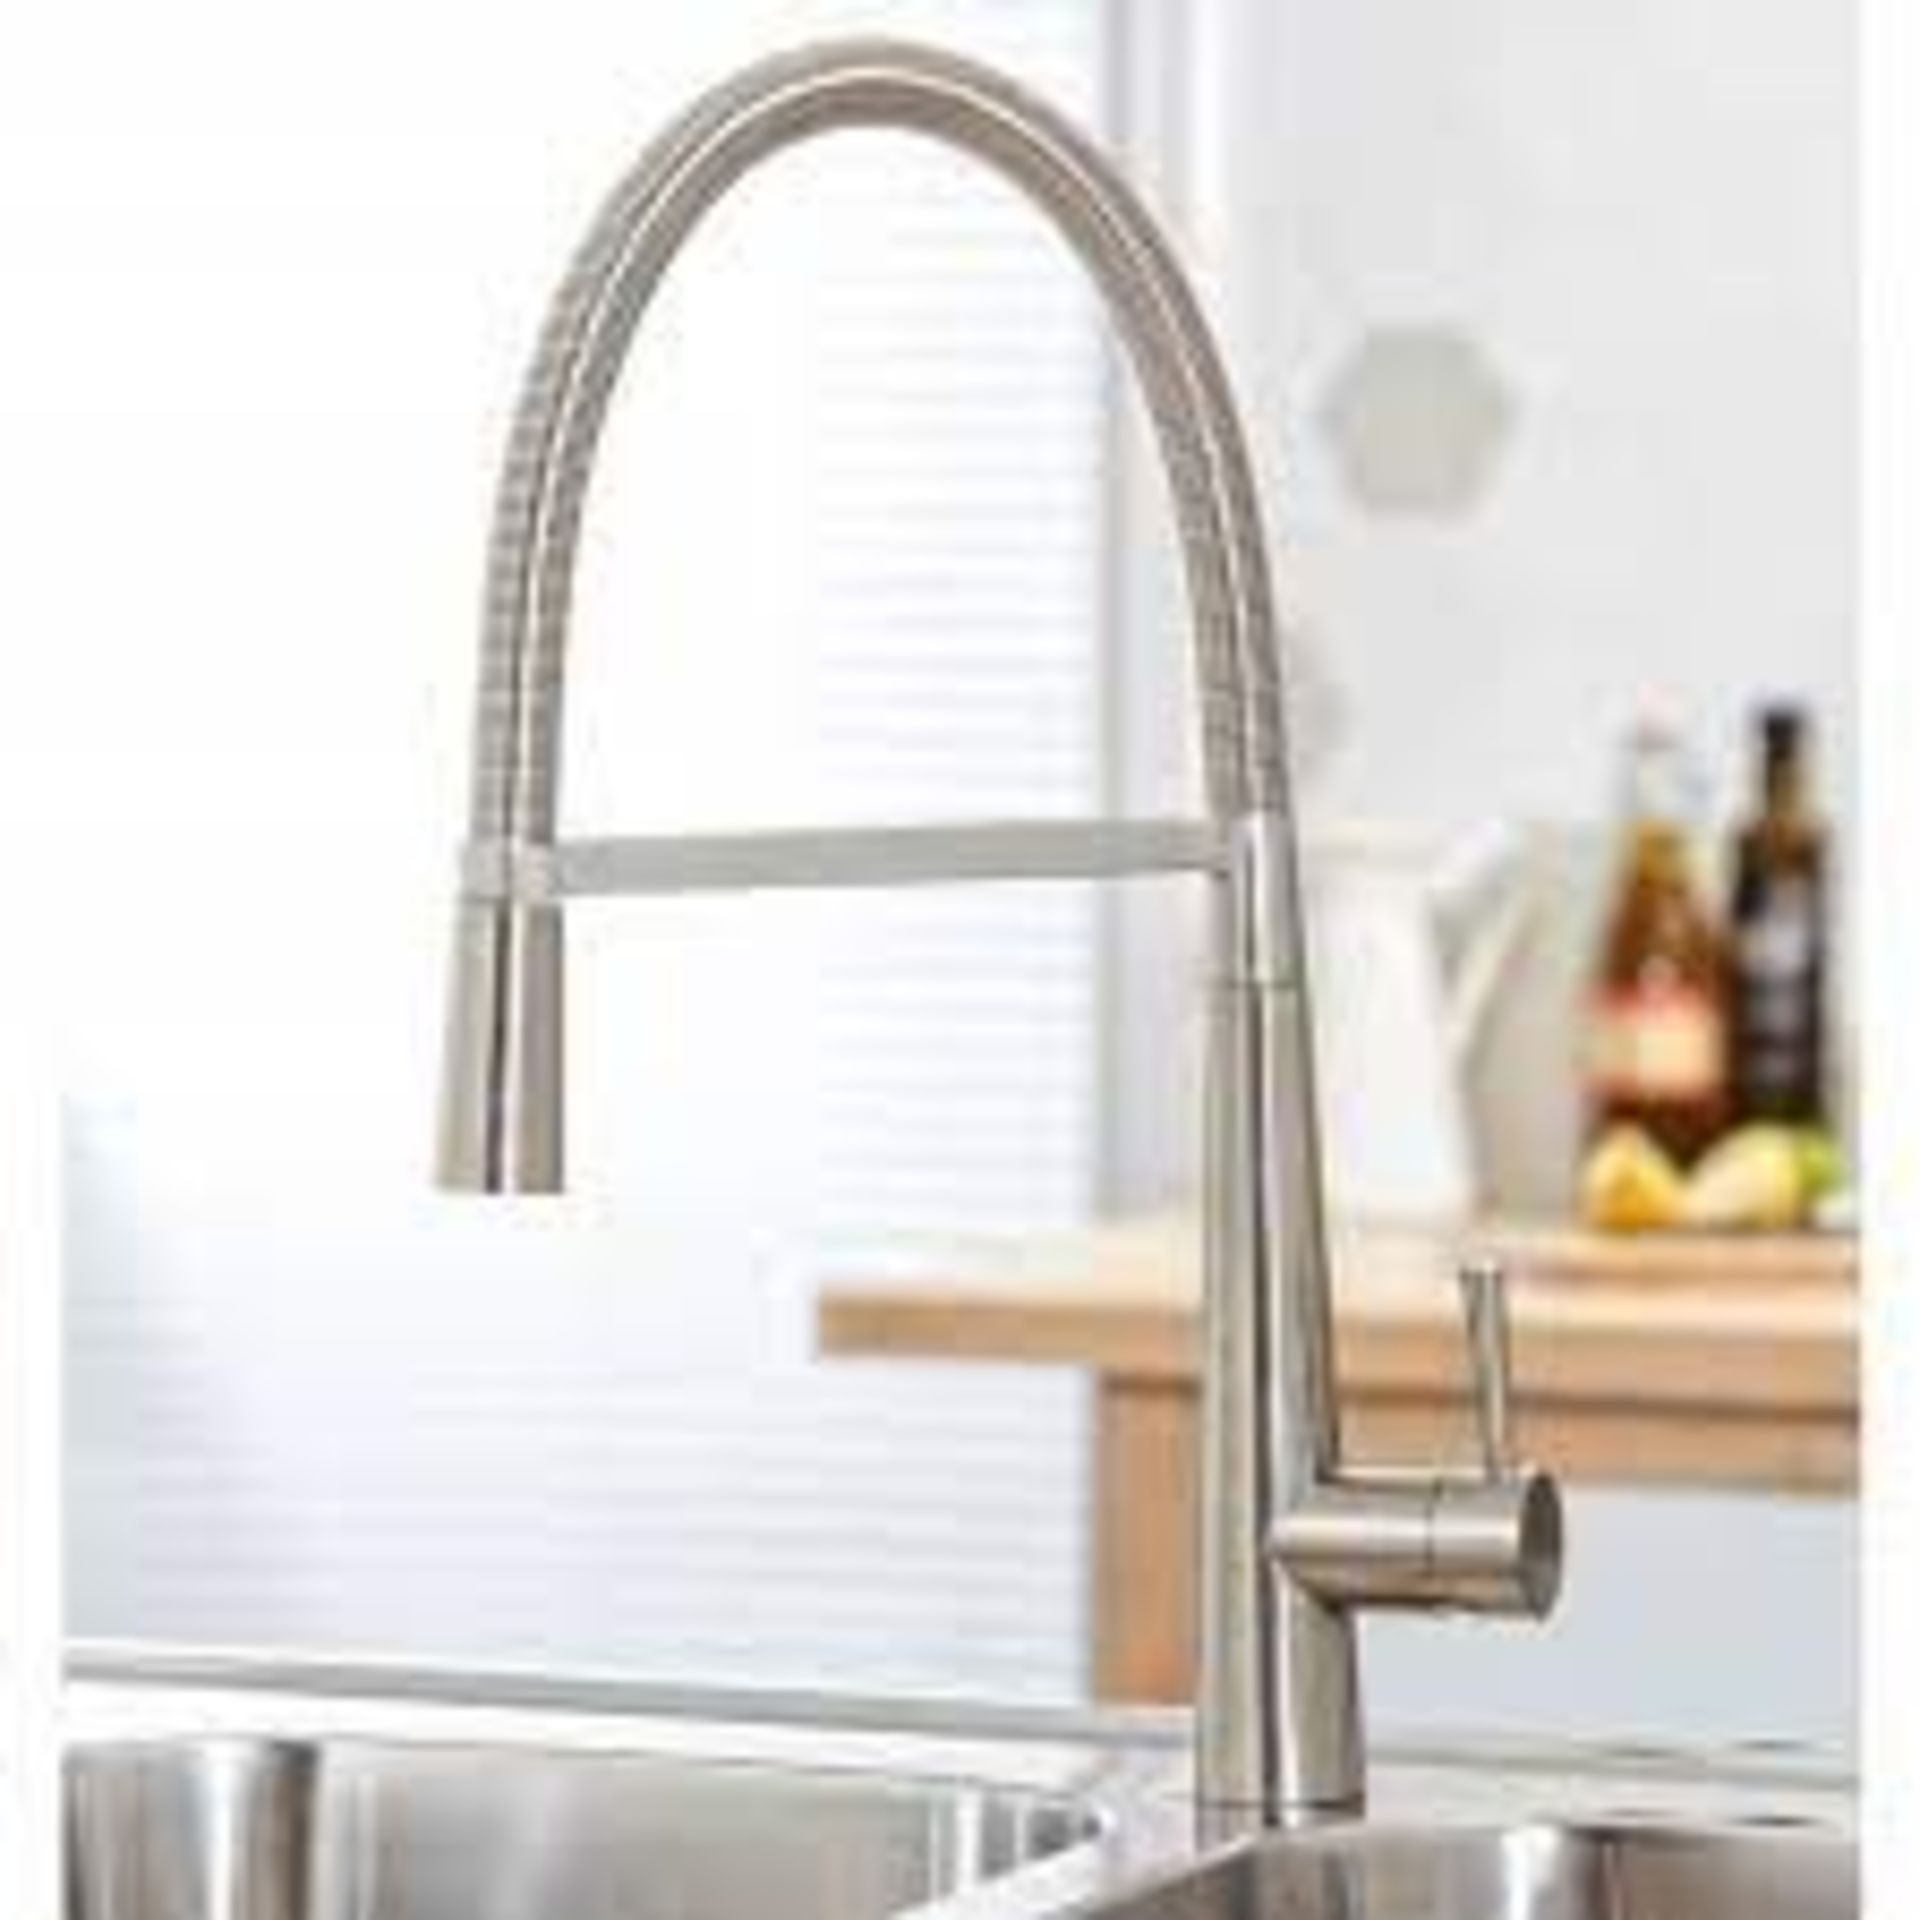 NEW (U125) Harbour Grace Pull Out Mono Kitchen Mixer - Brushed Stainless Steel. Monobloc kitchen